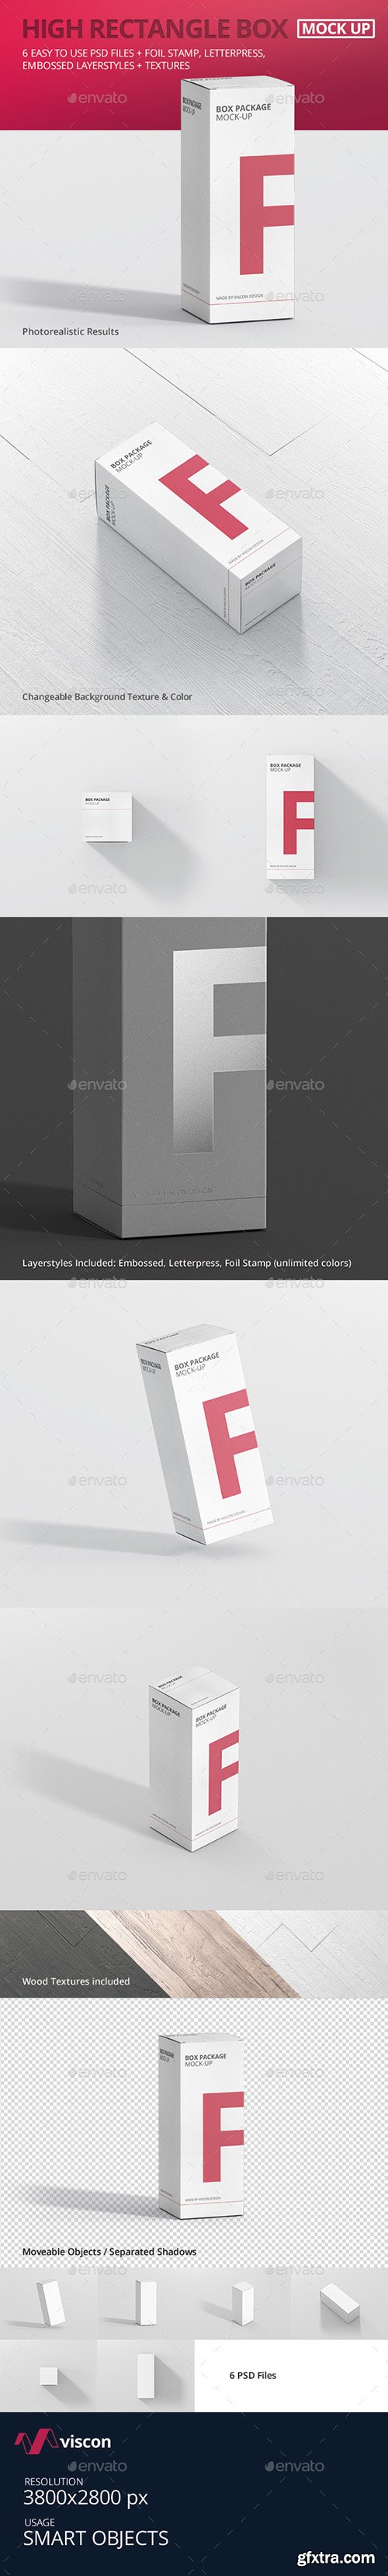 Graphicriver Package Box Mock-Up - High Rectangle 16828585